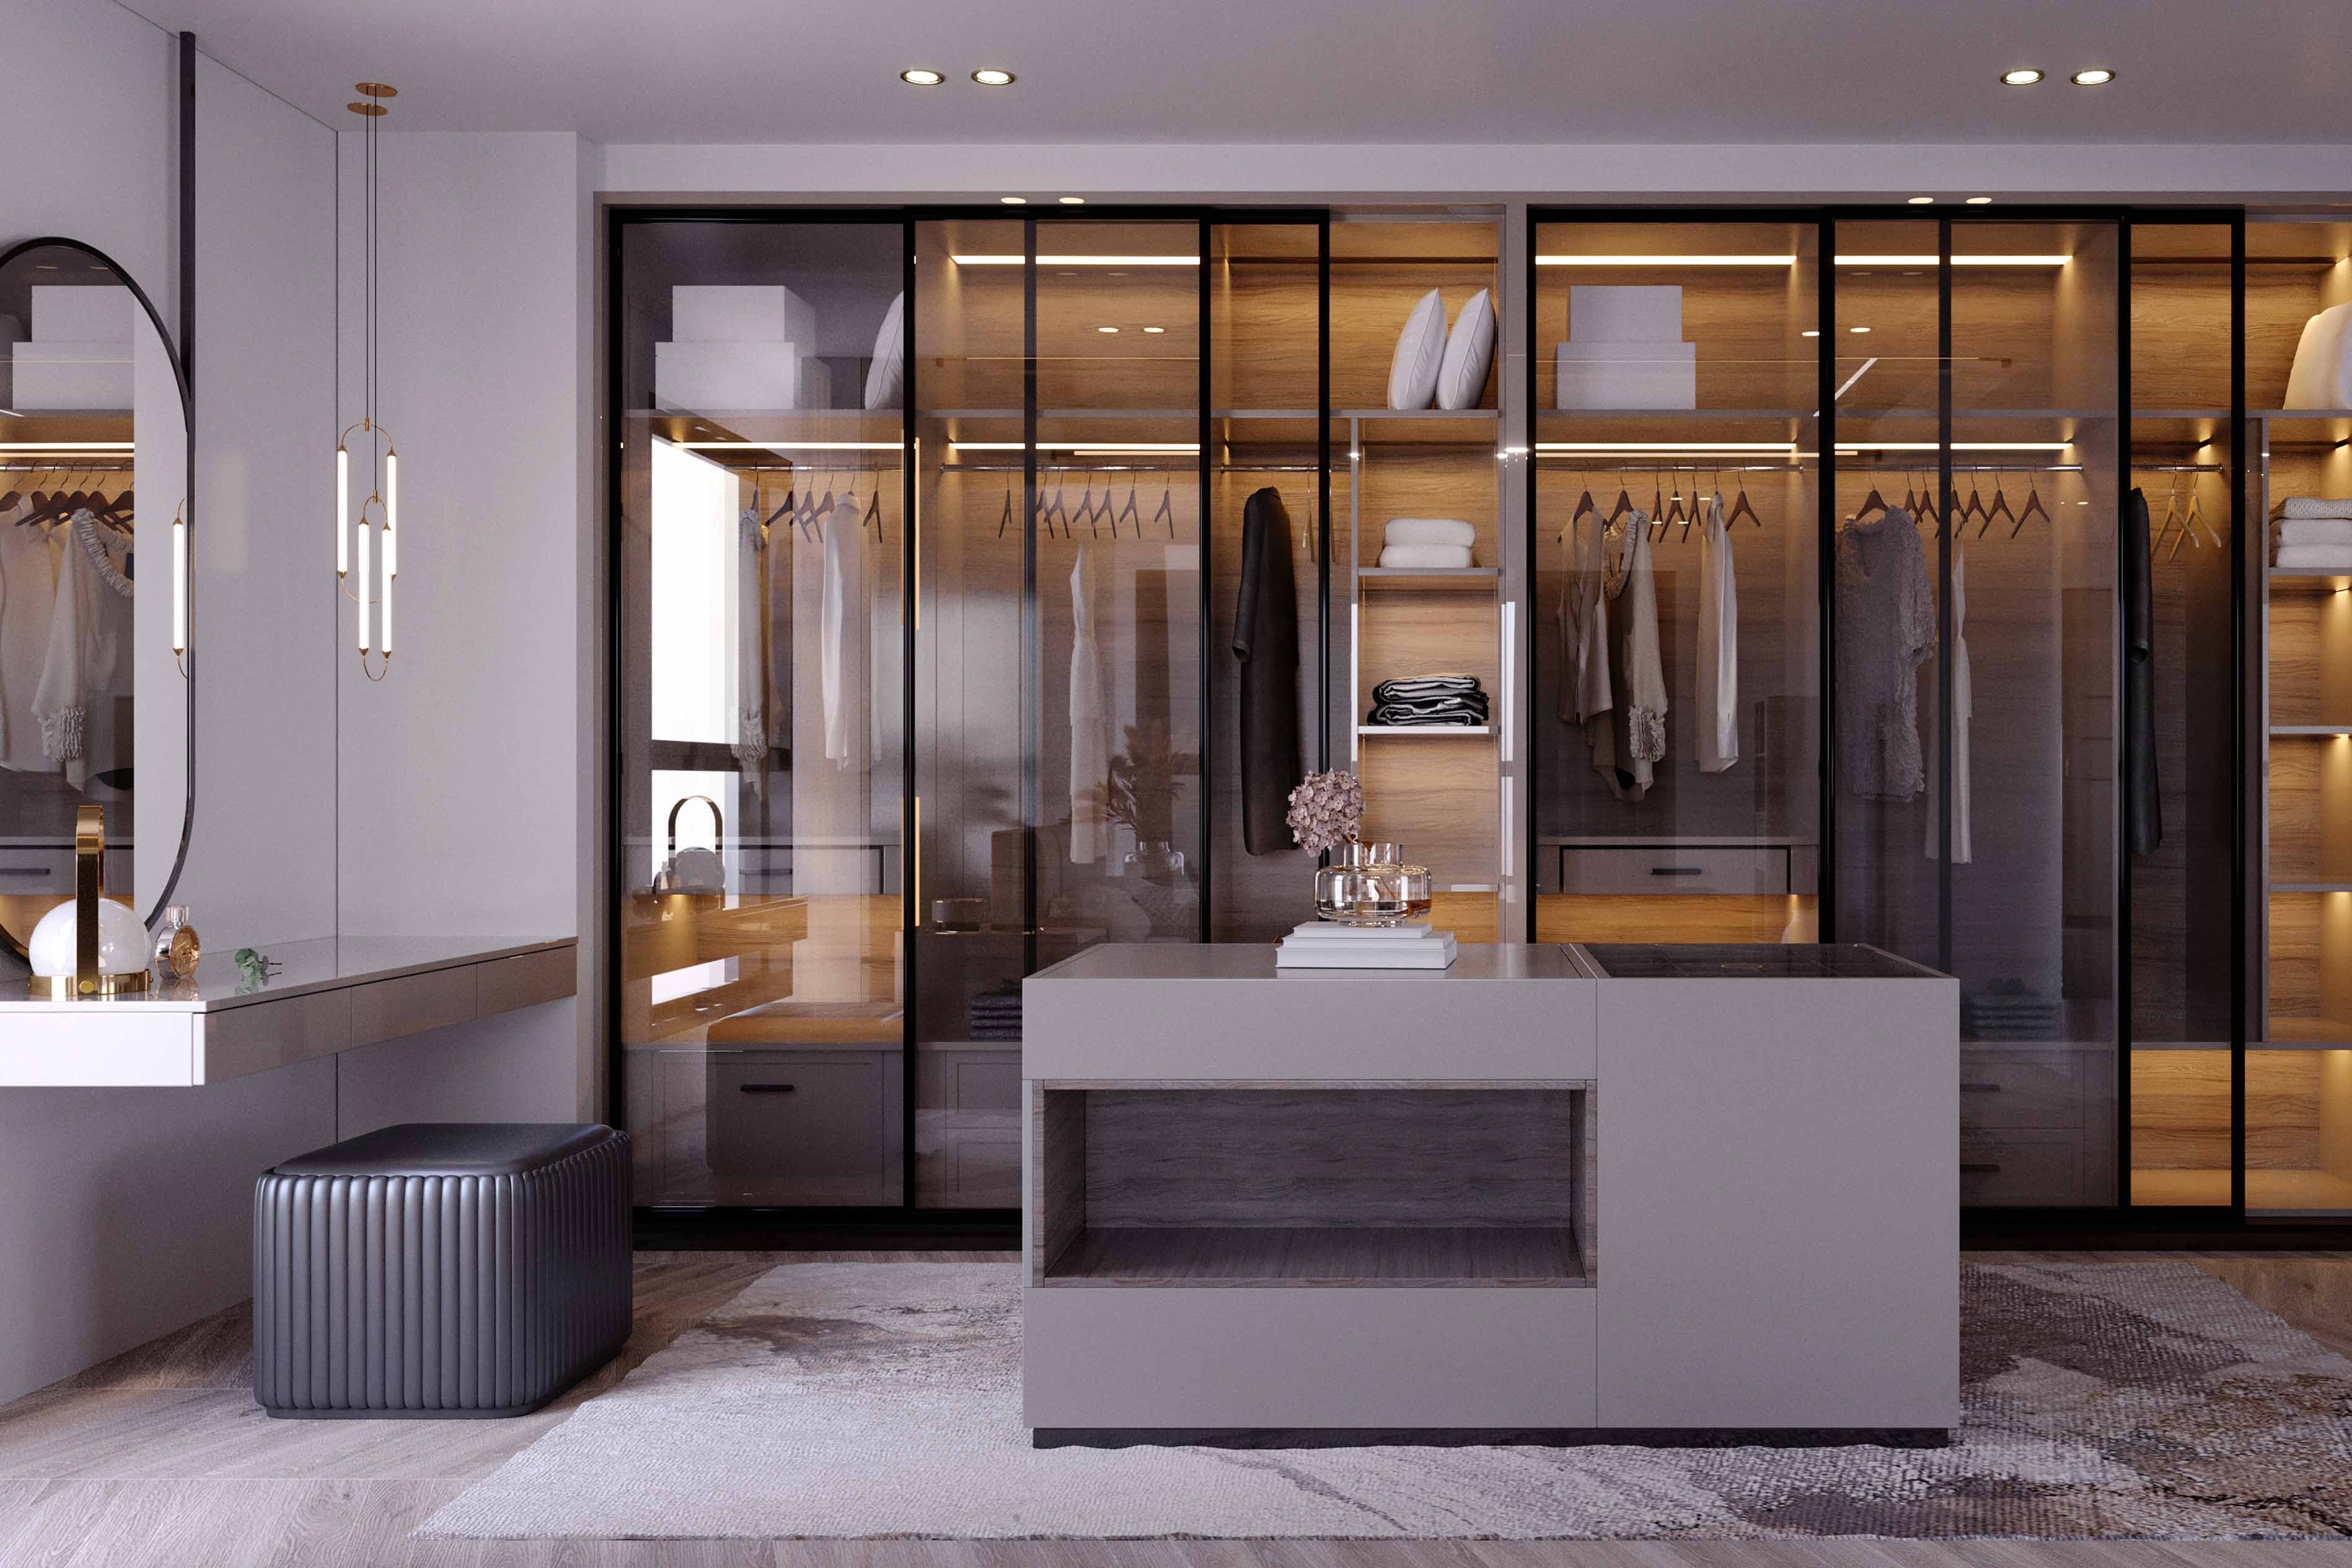 001. Bespoke fitted wardrobes his hers dressing room mylands farrow and ball armac martin glass doorless hanging en suite near Guildford Surrey